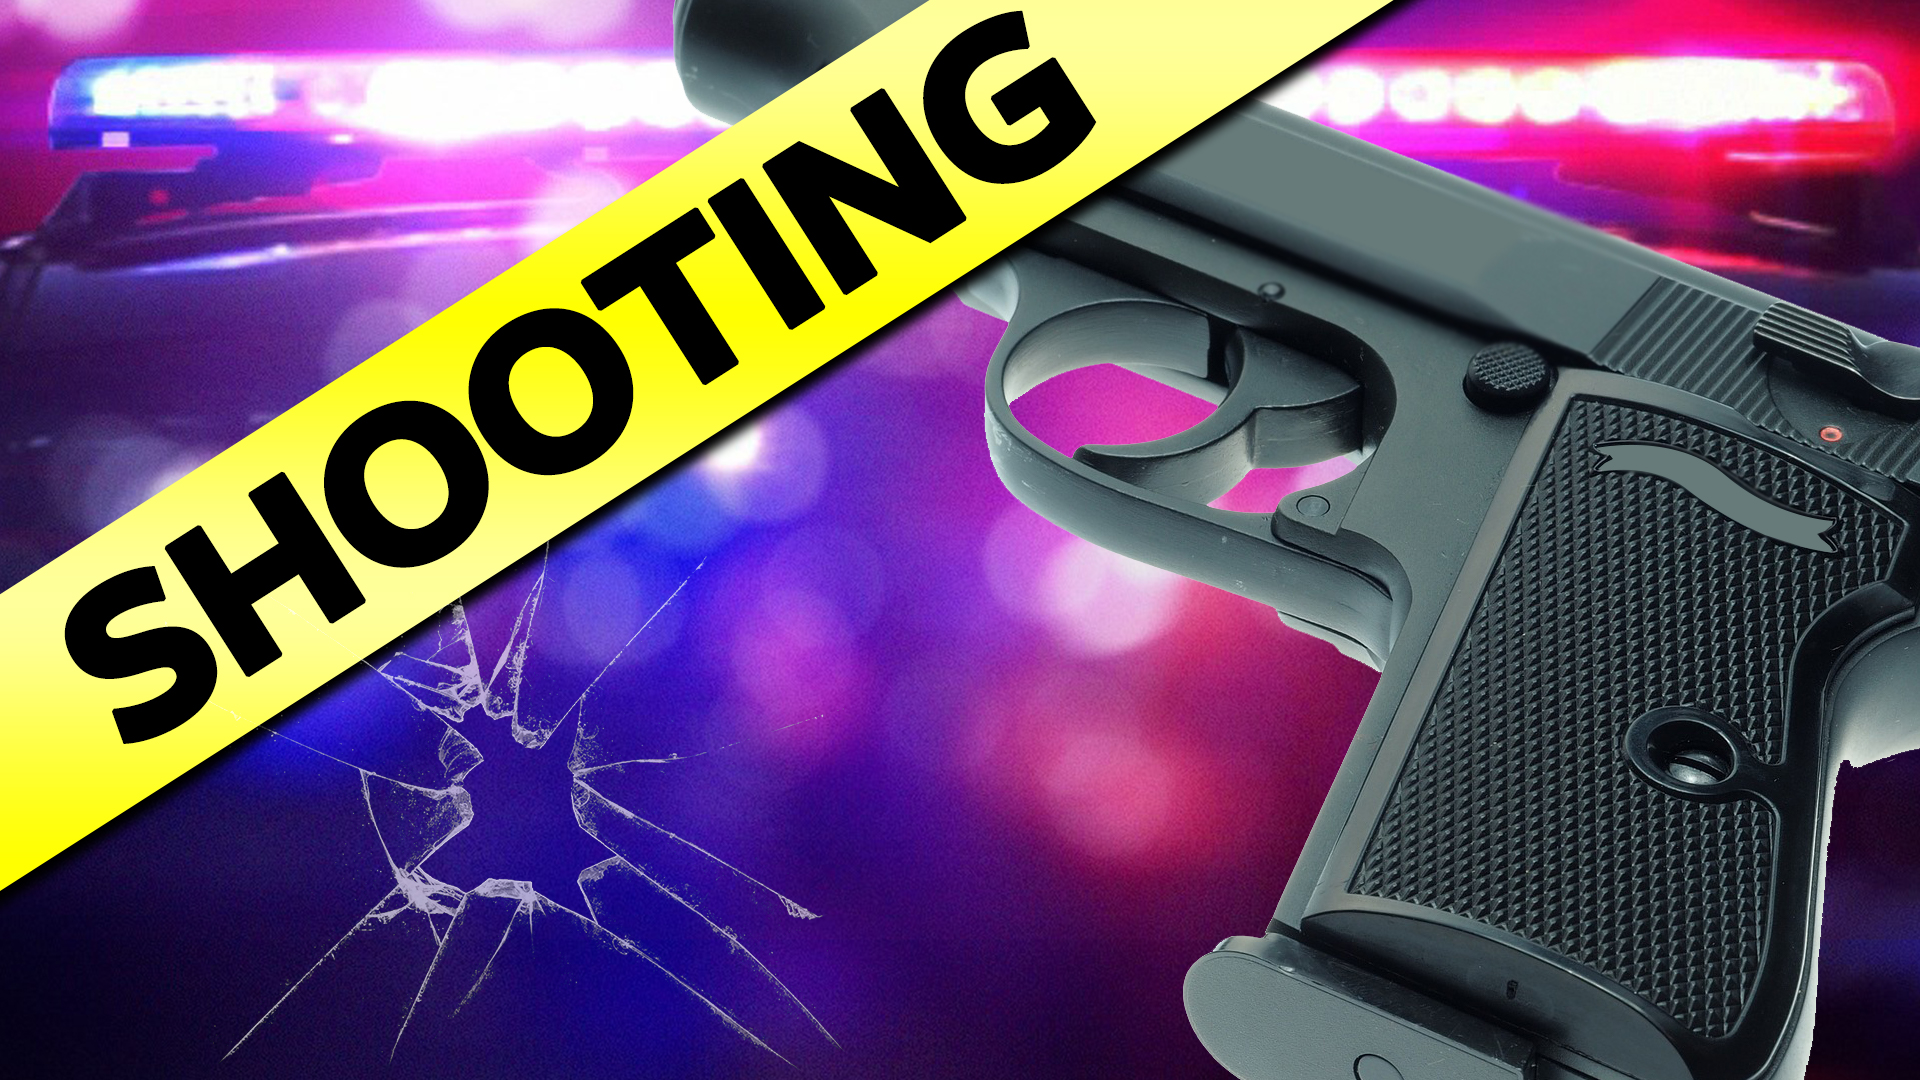 St. Thomas Man Shot In The Kneecap After Argument With Woman In Sugar Estate